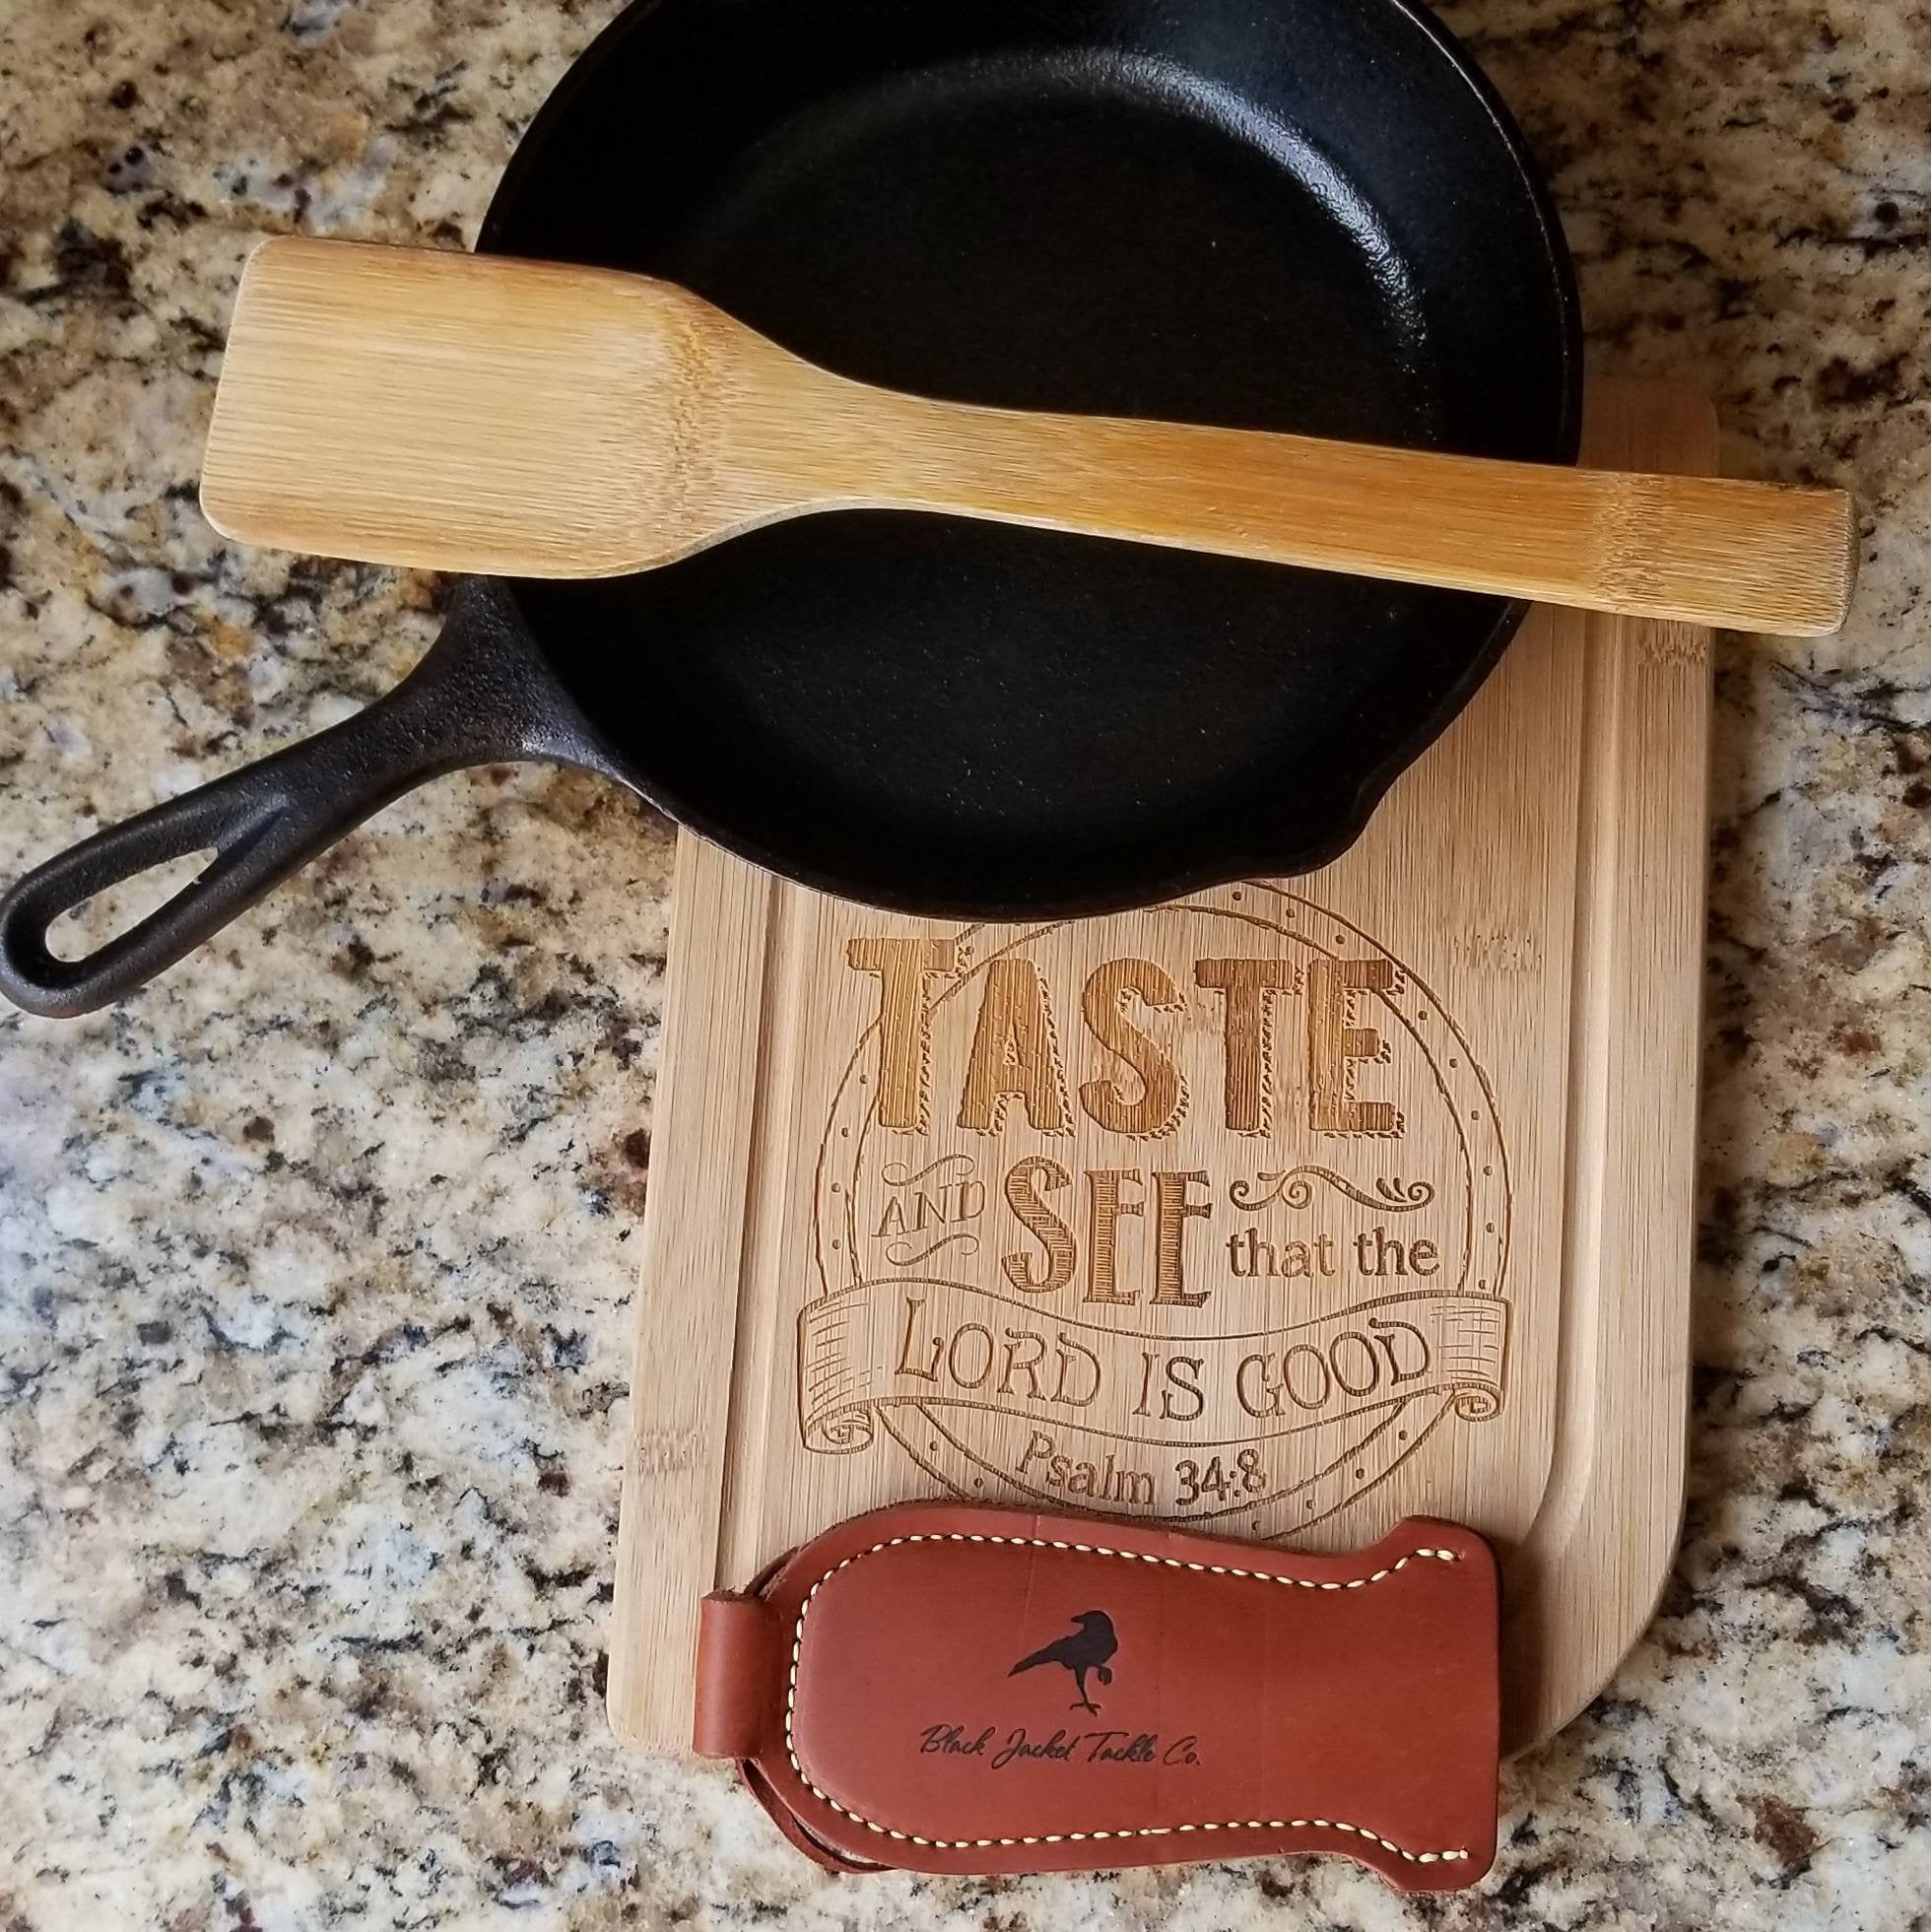 Standard pan handle holder shown with cast iron skillet, wooden spoon and wood cutting board